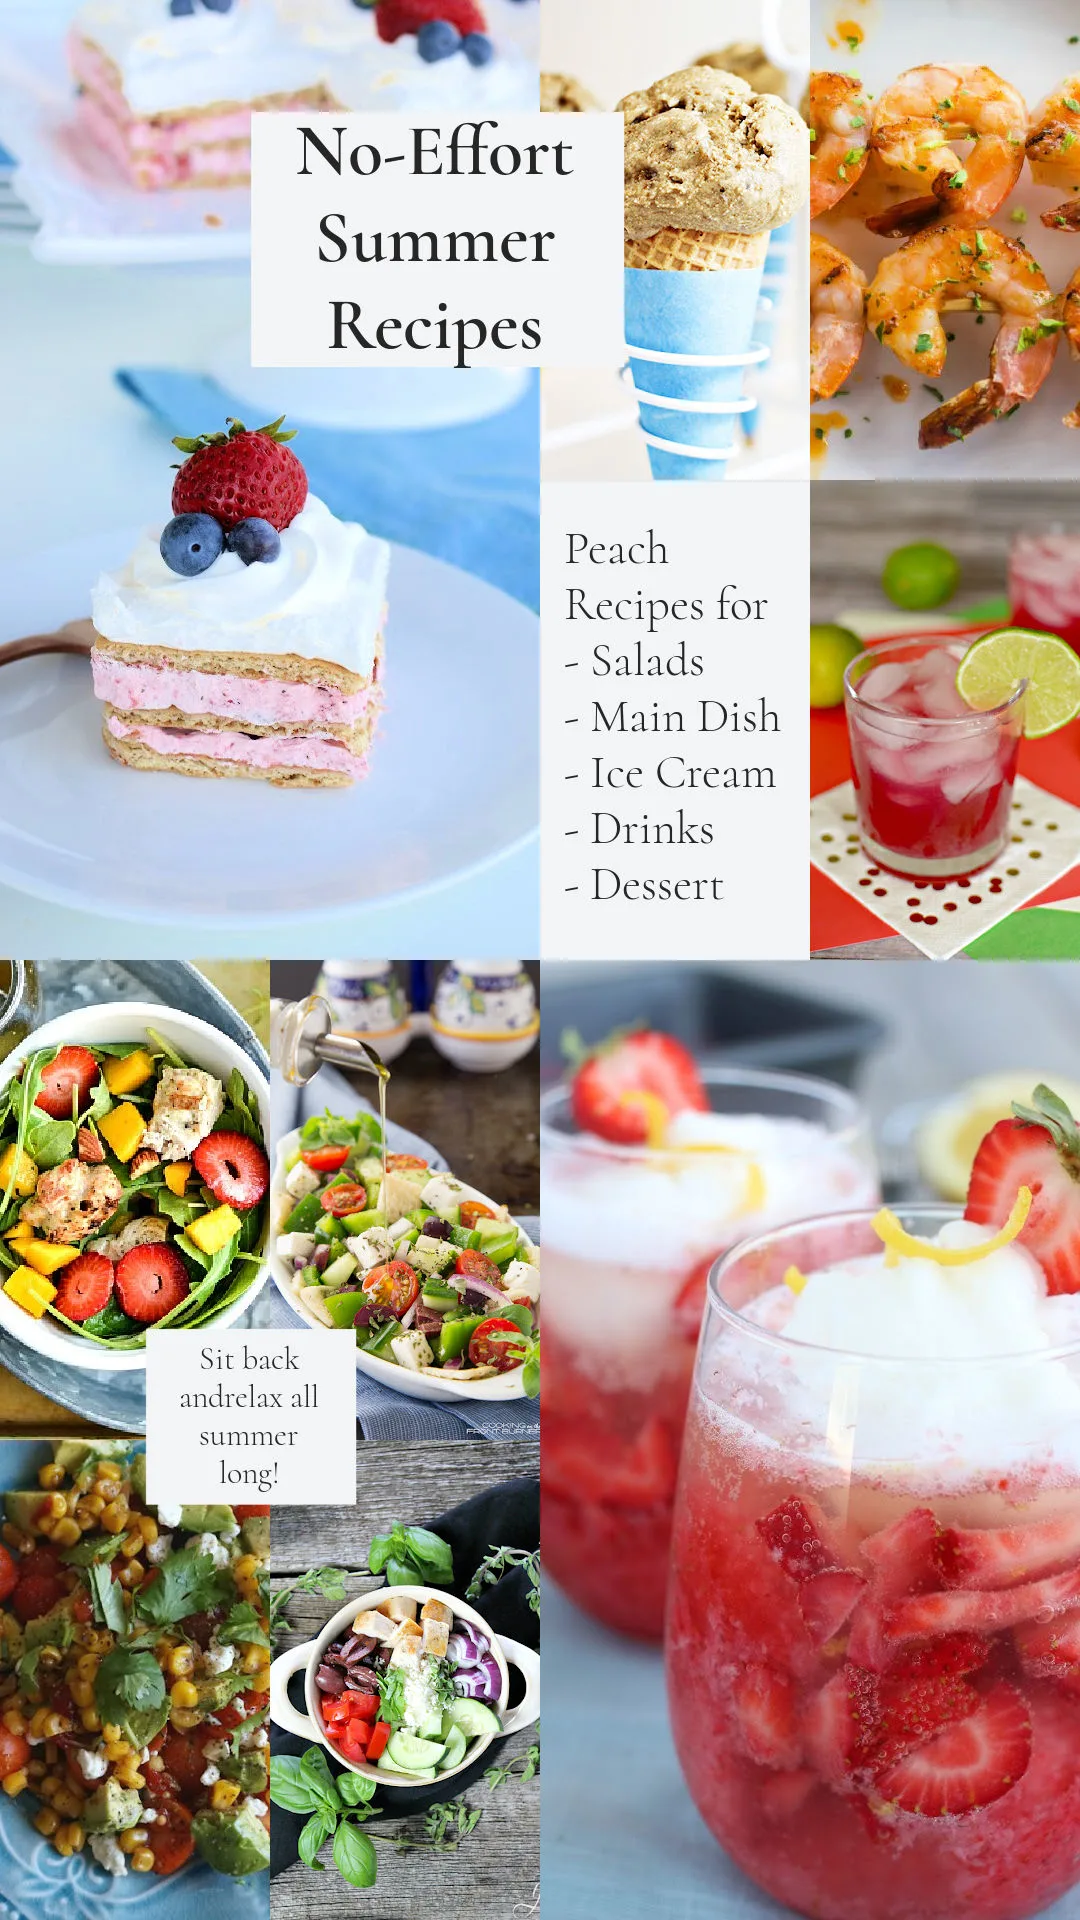 Perfect no-effort recipes for summer. Load up on Salads, main dishes, desserts, and drinks so that you can relax and enjoy the summer.